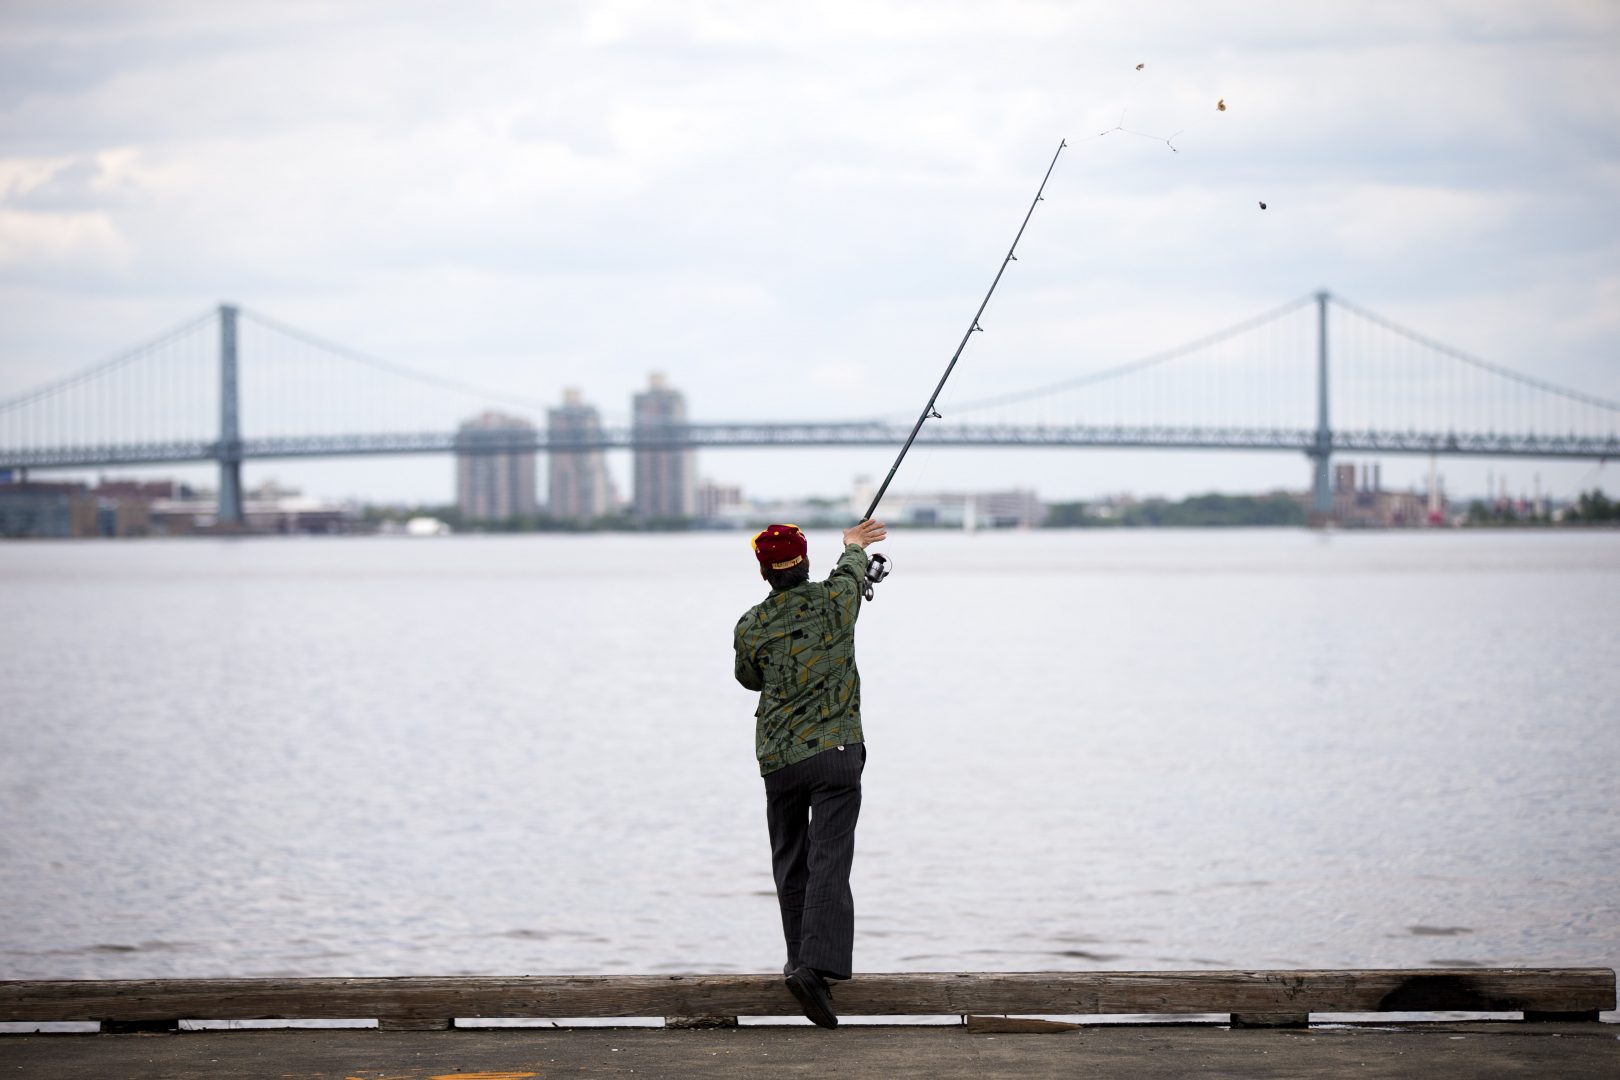 A man casts his line as he fishes for catfish in the Delaware River in view of the Benjamin Franklin Bridge. 